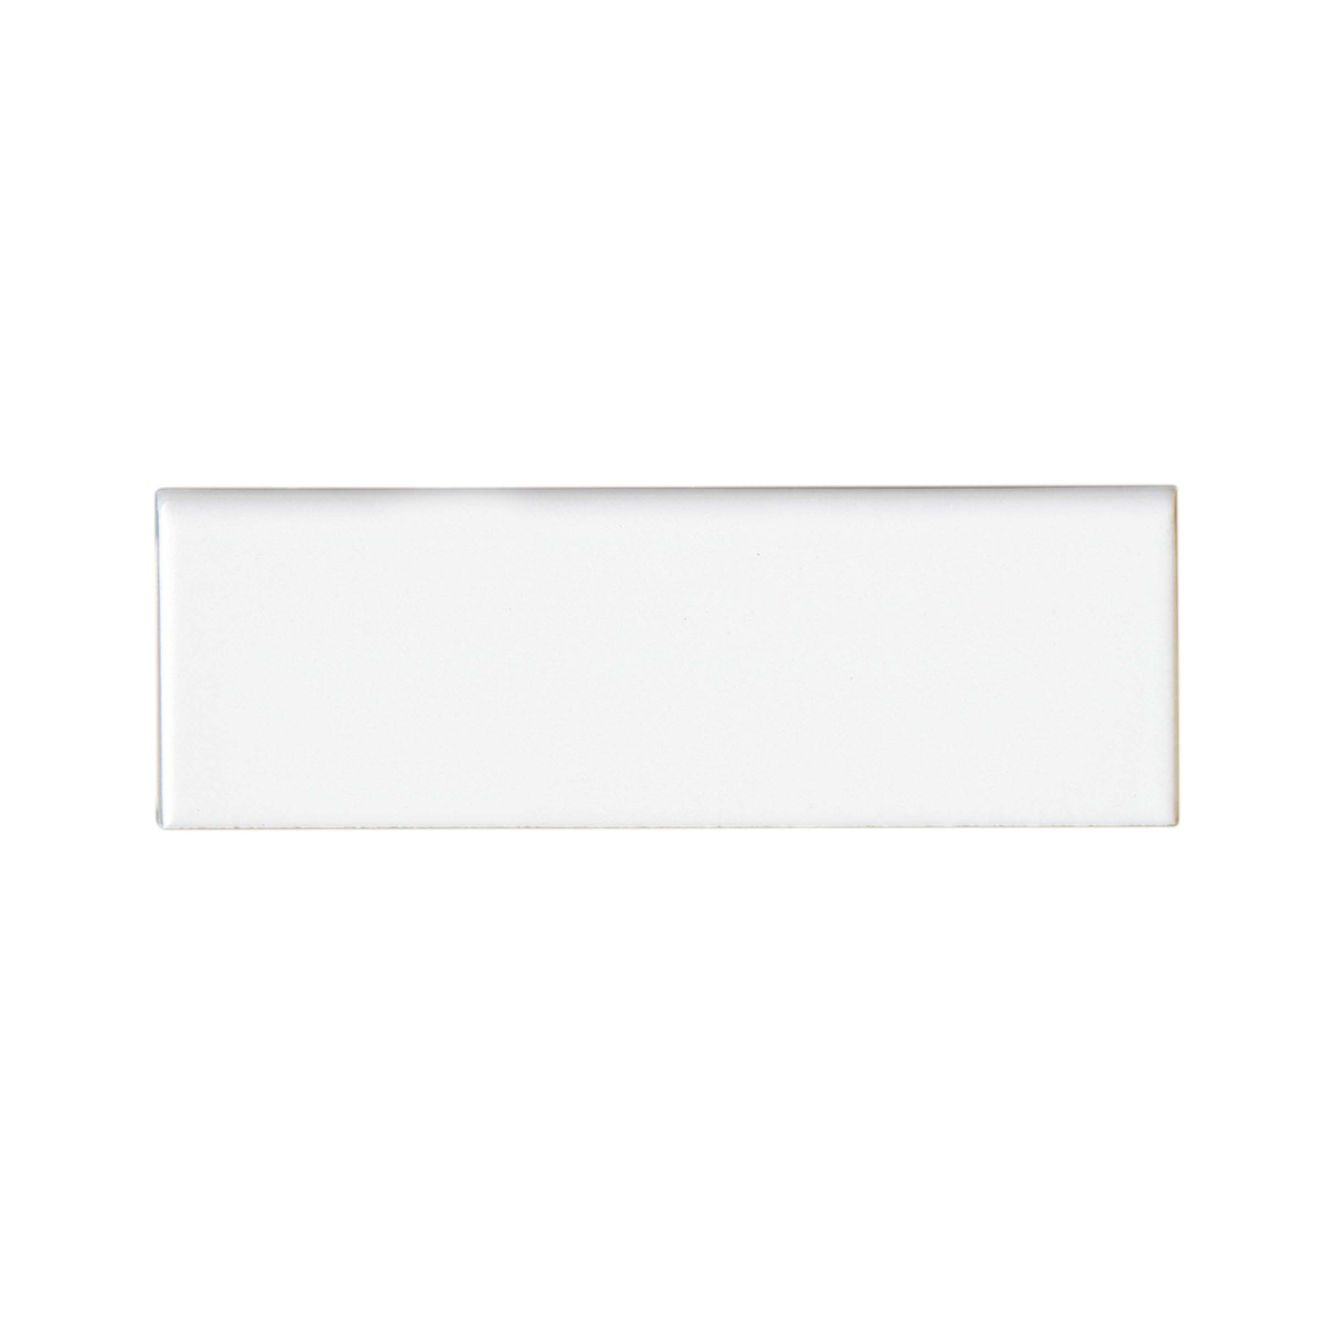 Traditions 3" x 10" Bullnose Trim Tile